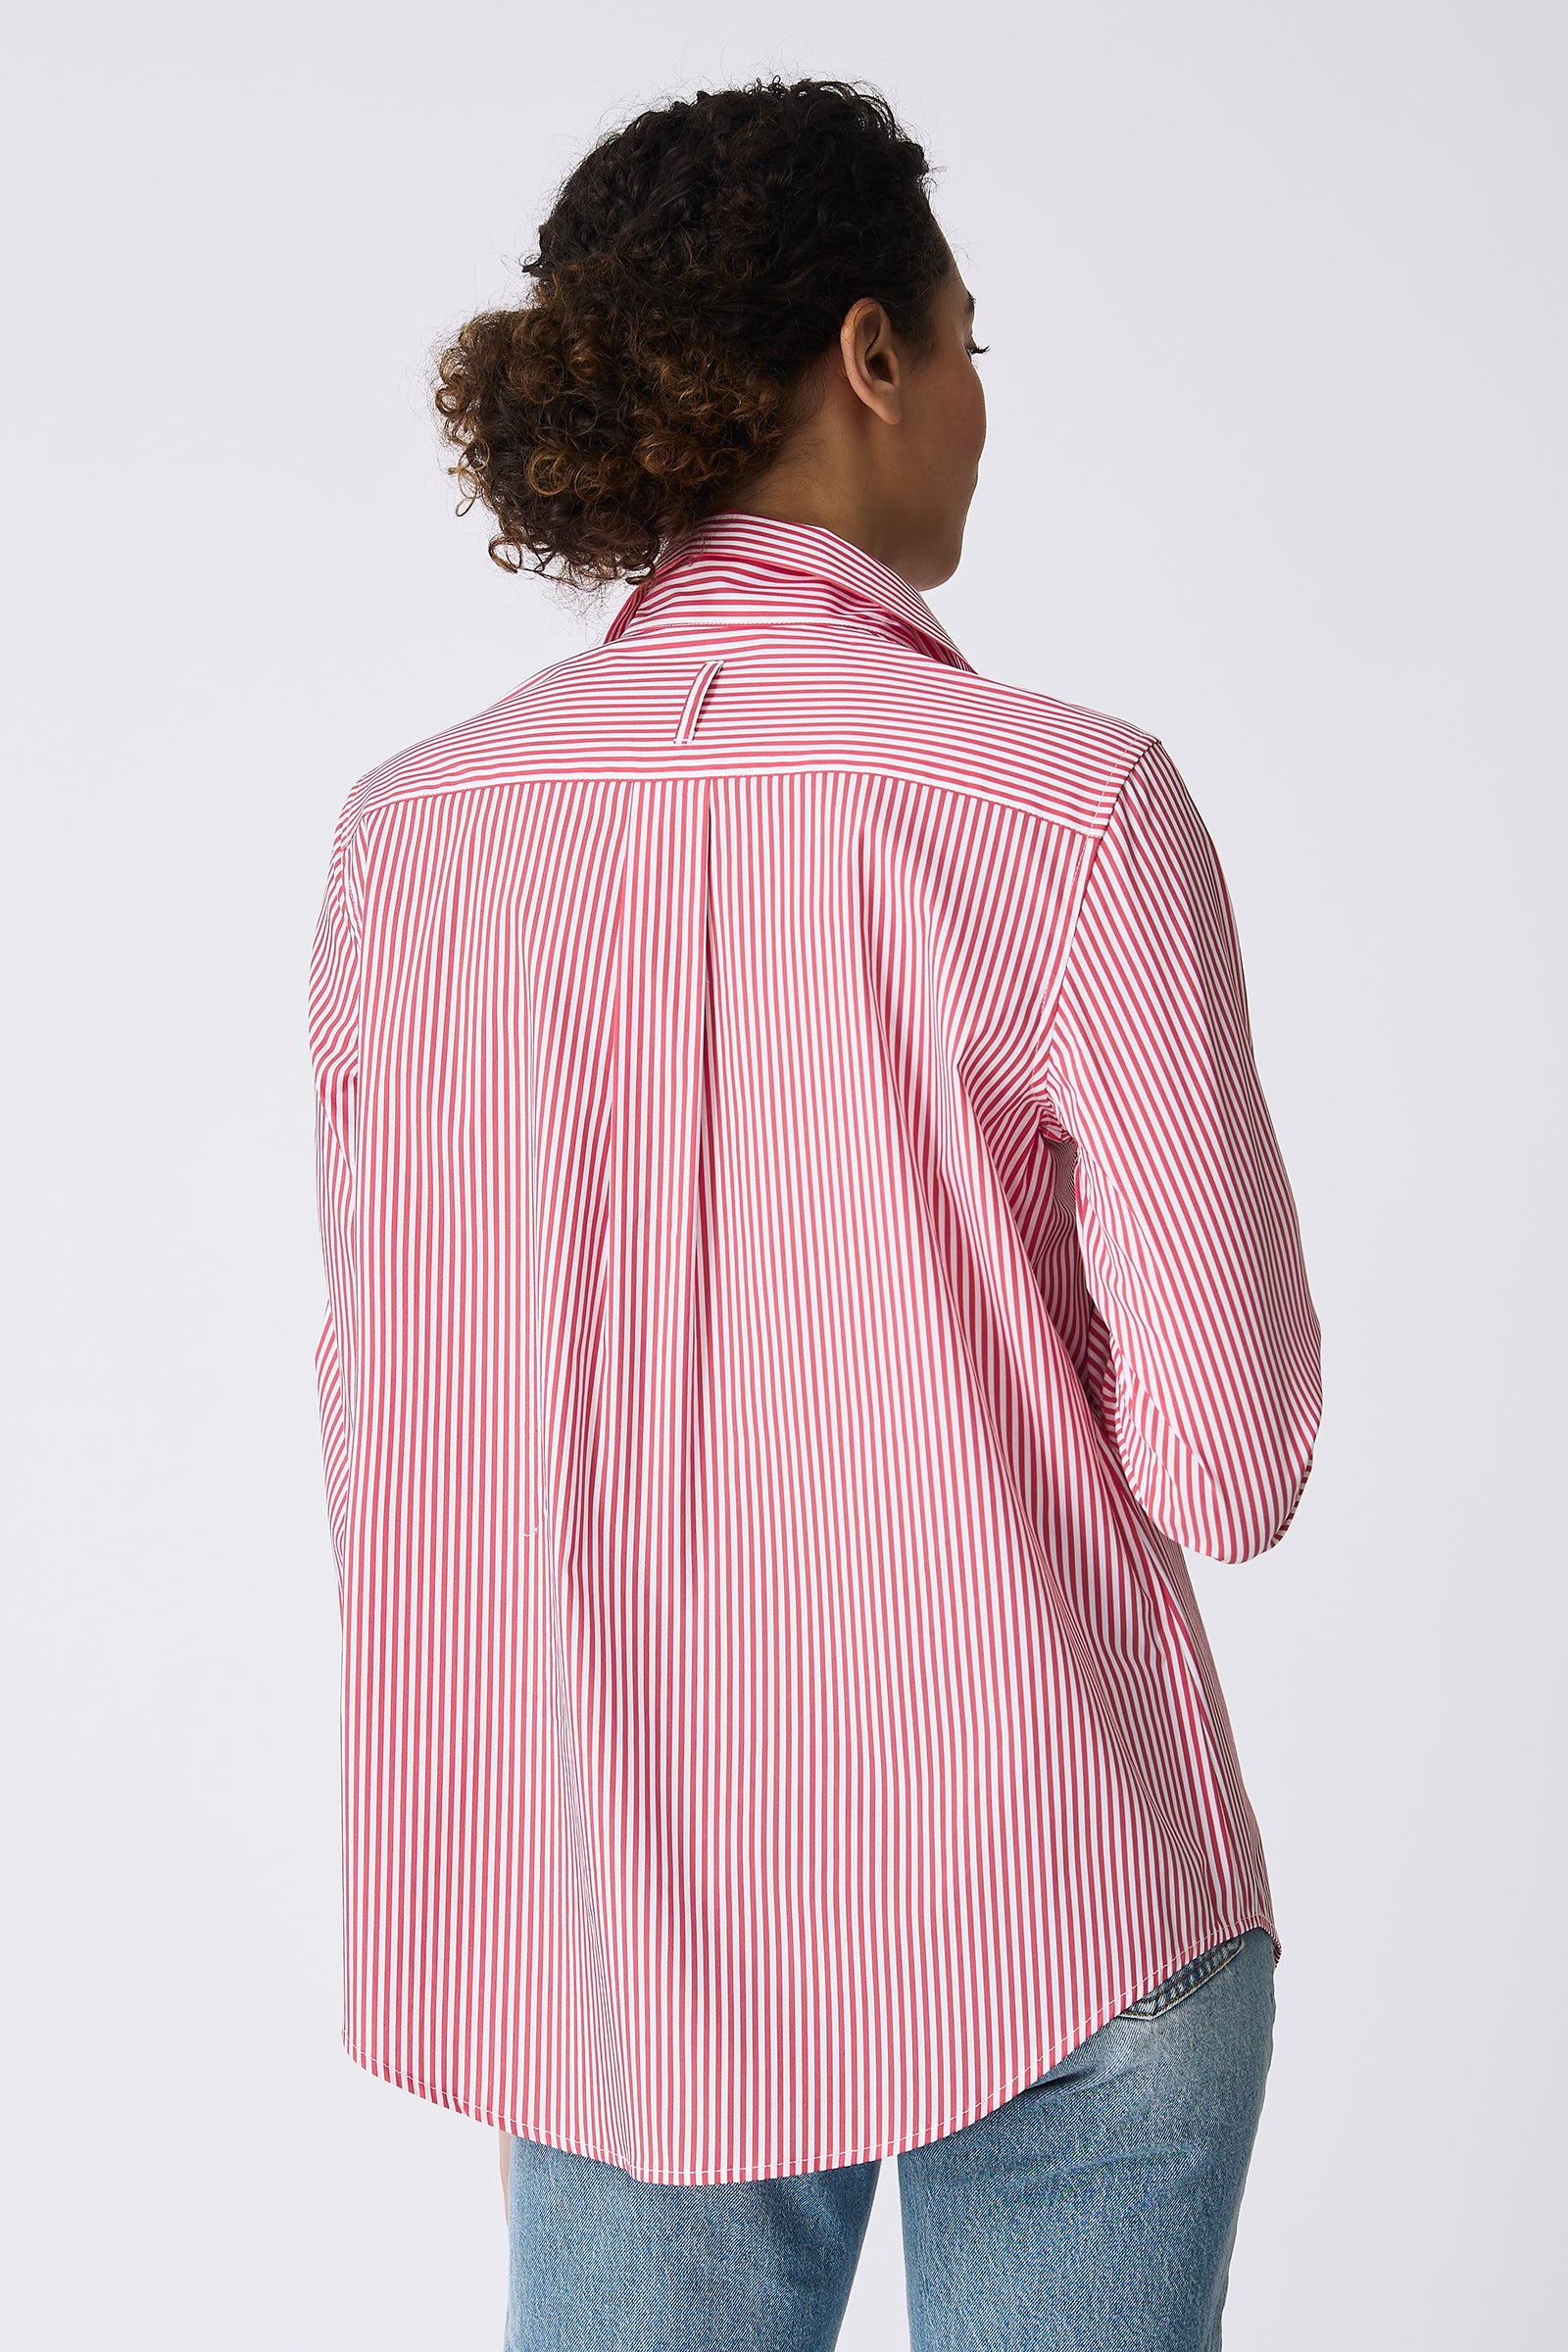 Kal Rieman image of the Ginna Box Pleat Shirt in Miami Stripe Red on model touching buttons front view